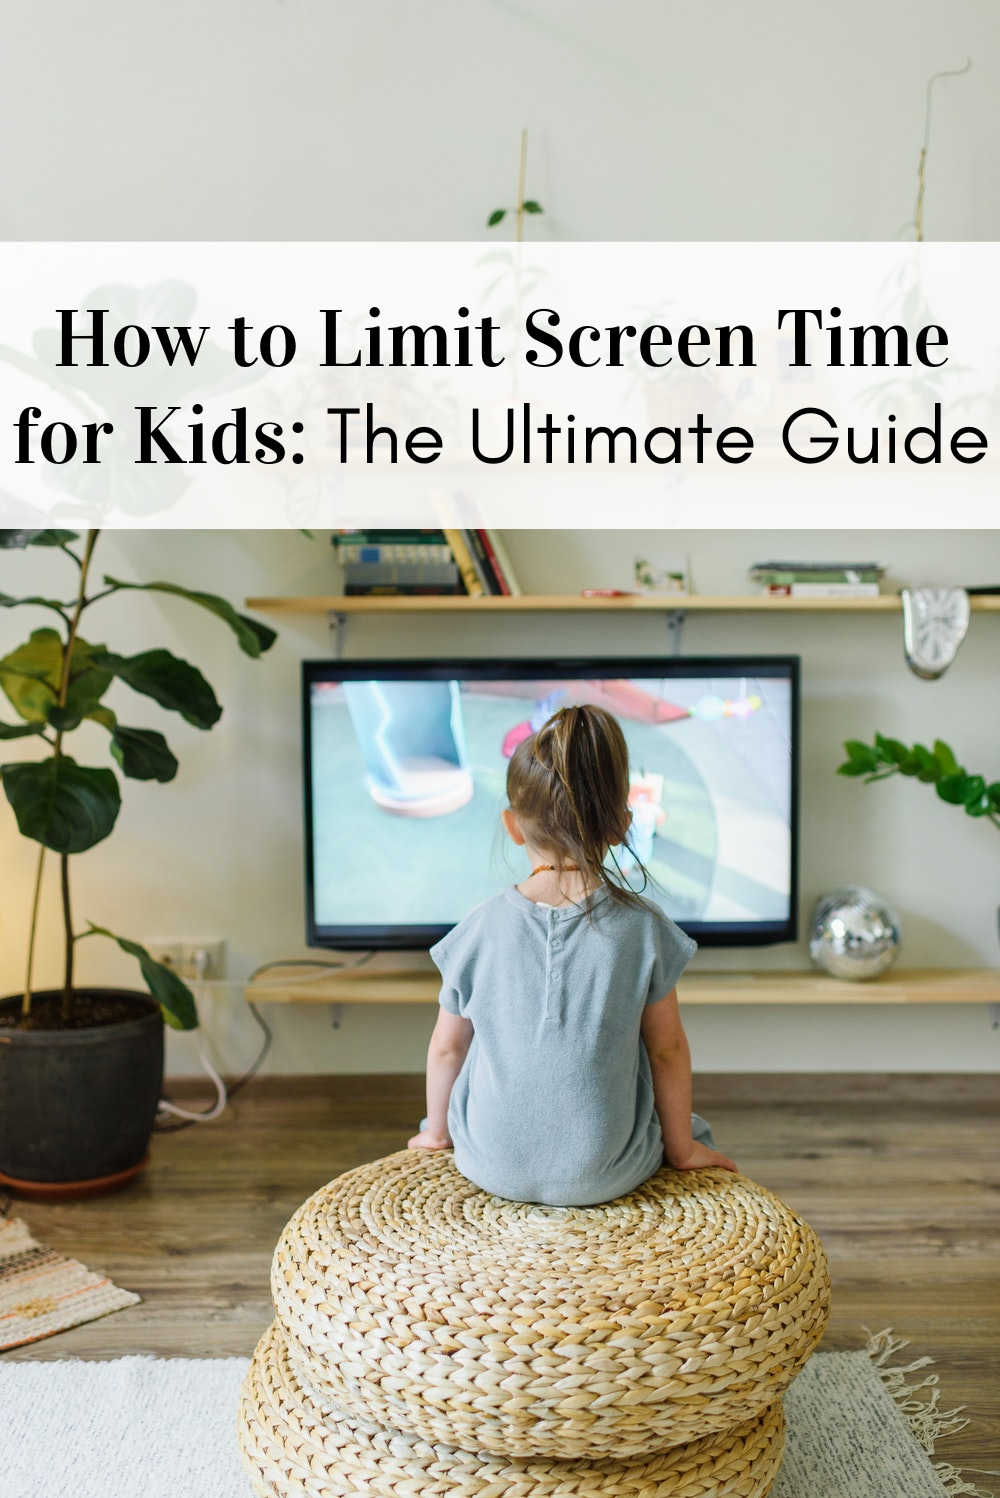 How to Limit Screen Time for Kids: The Ultimate Guide